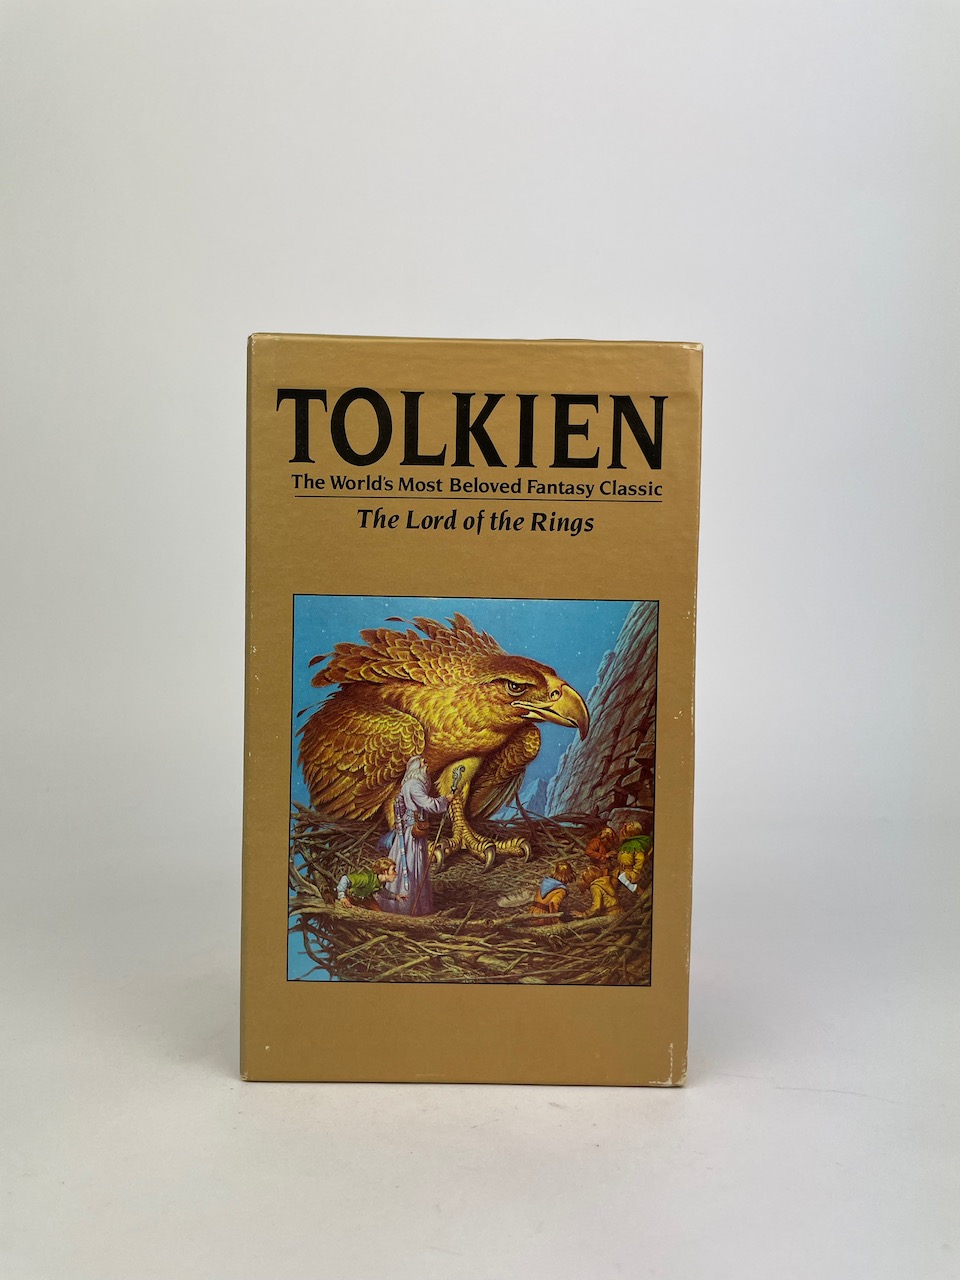 The Lord of the Rings and The Hobbit set from 1984, by Ballantine Books, New York 7